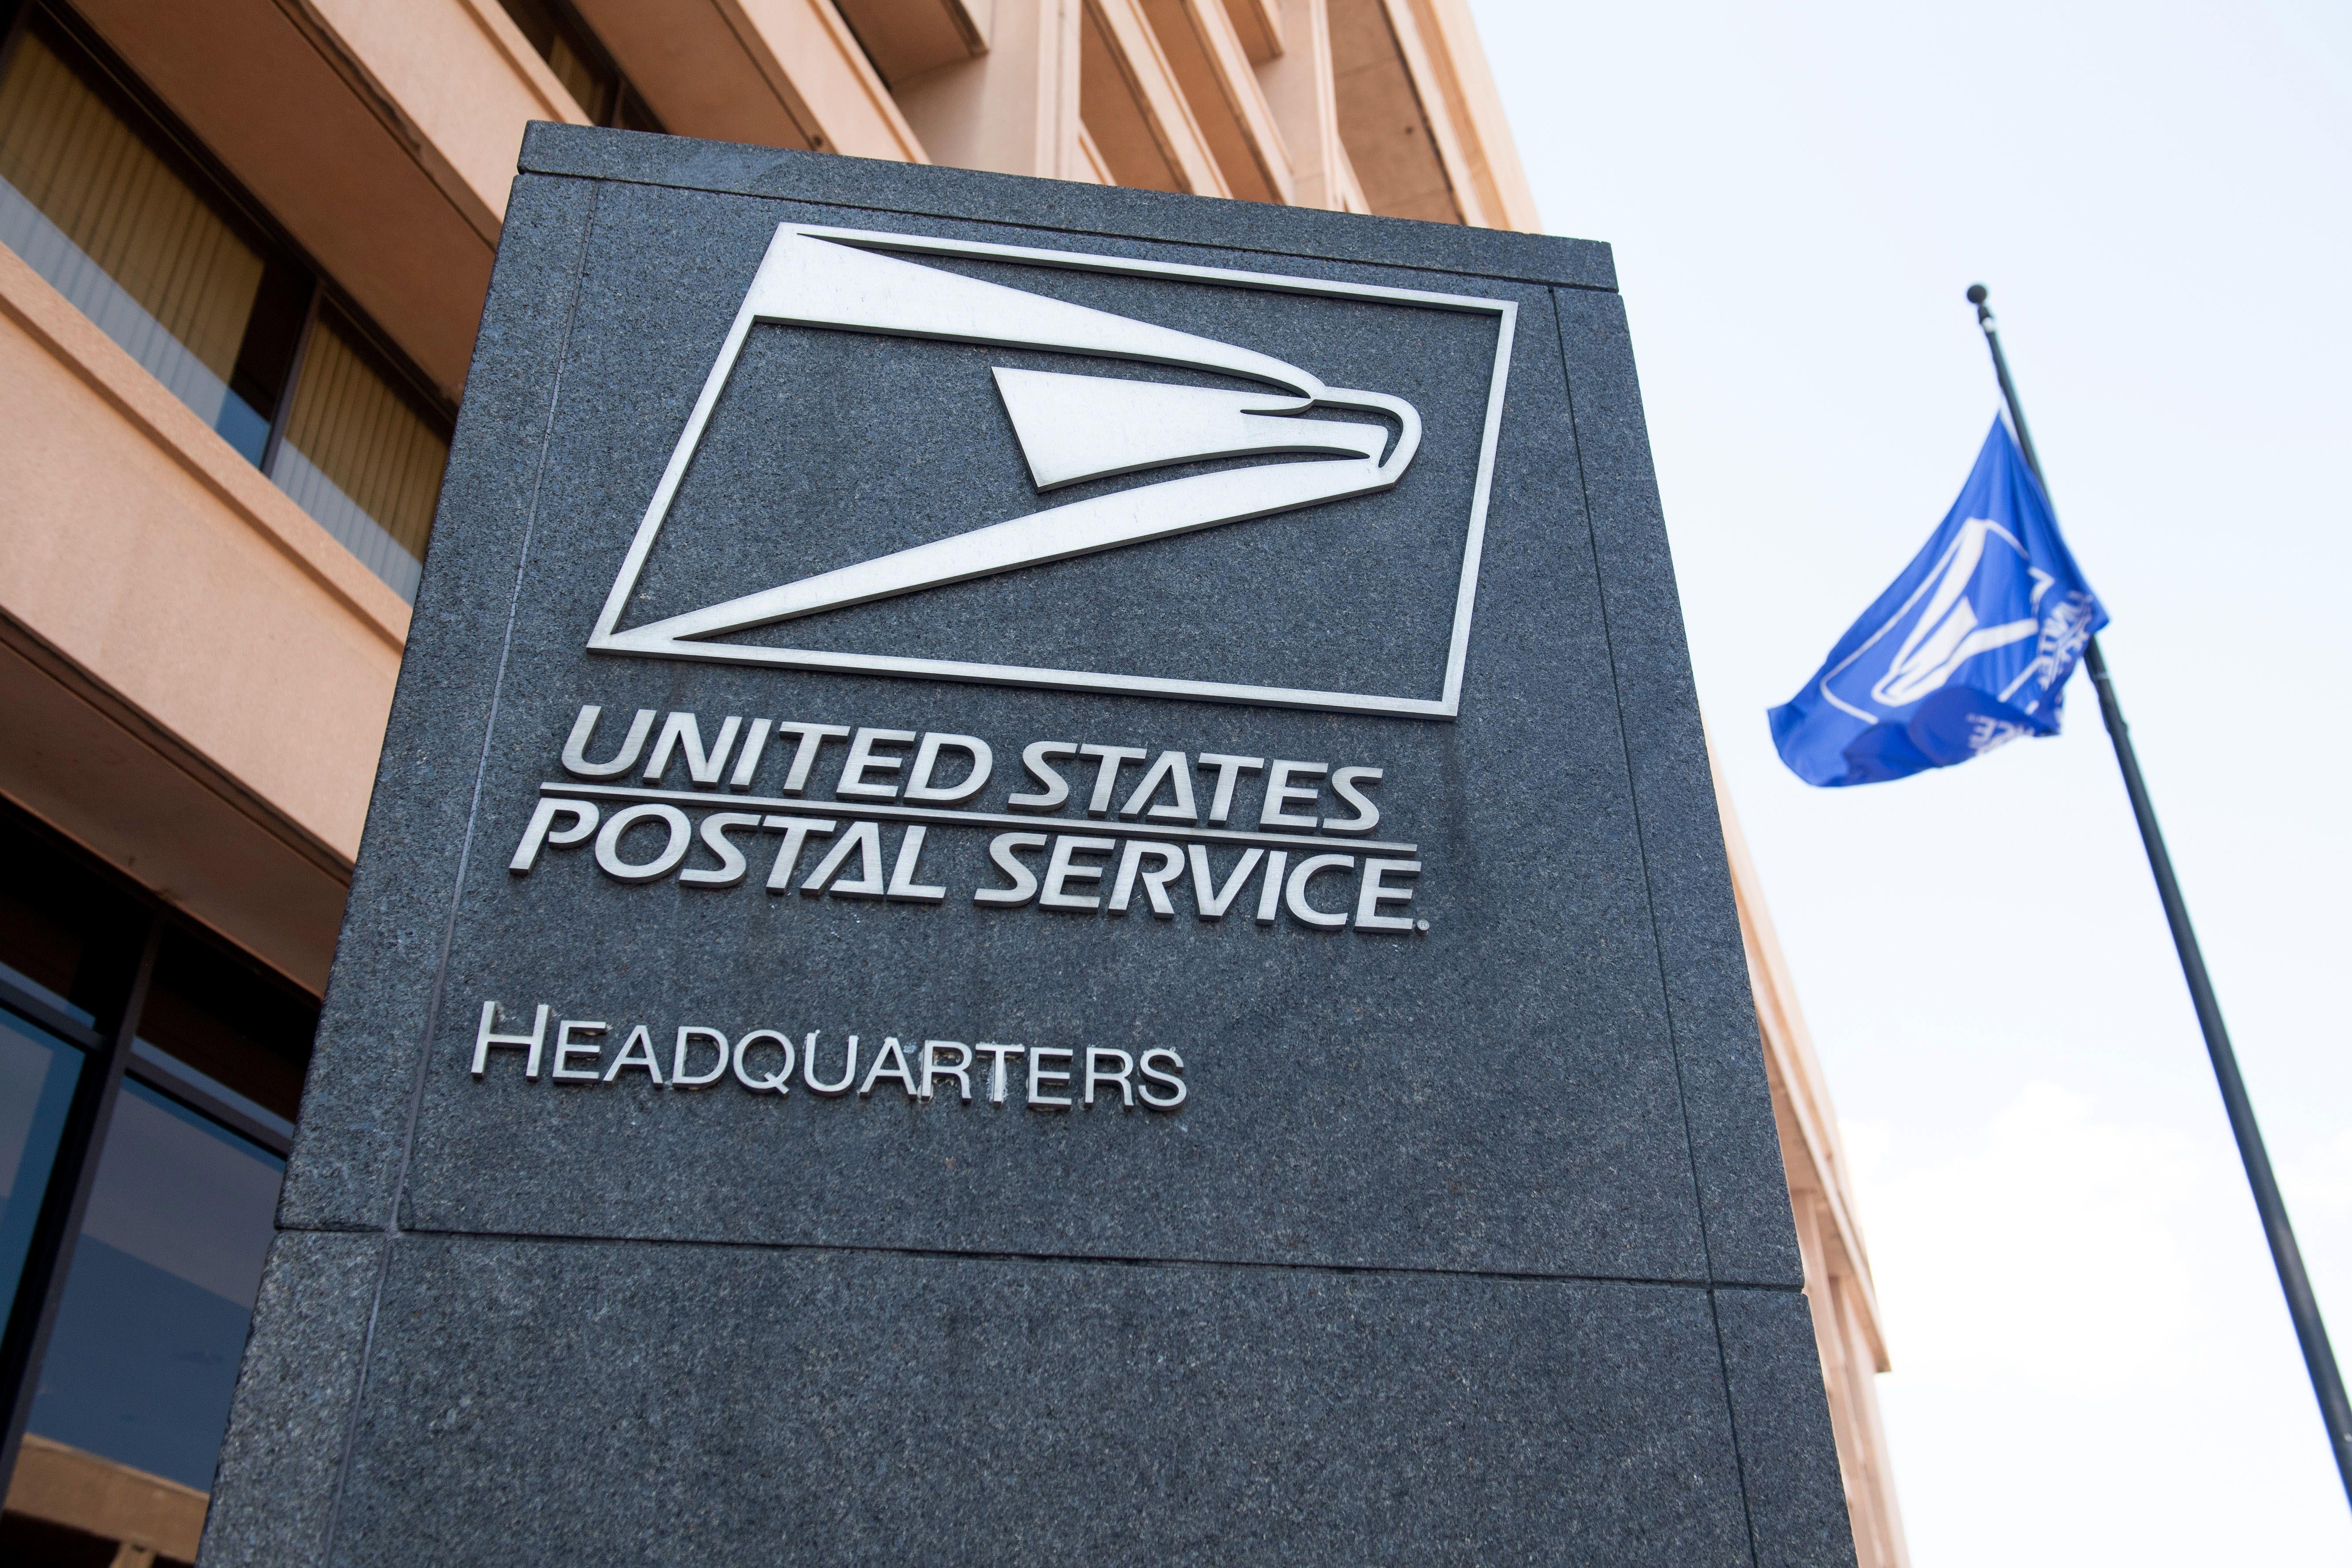 The sign of the headquarters of the United States Postal Service.